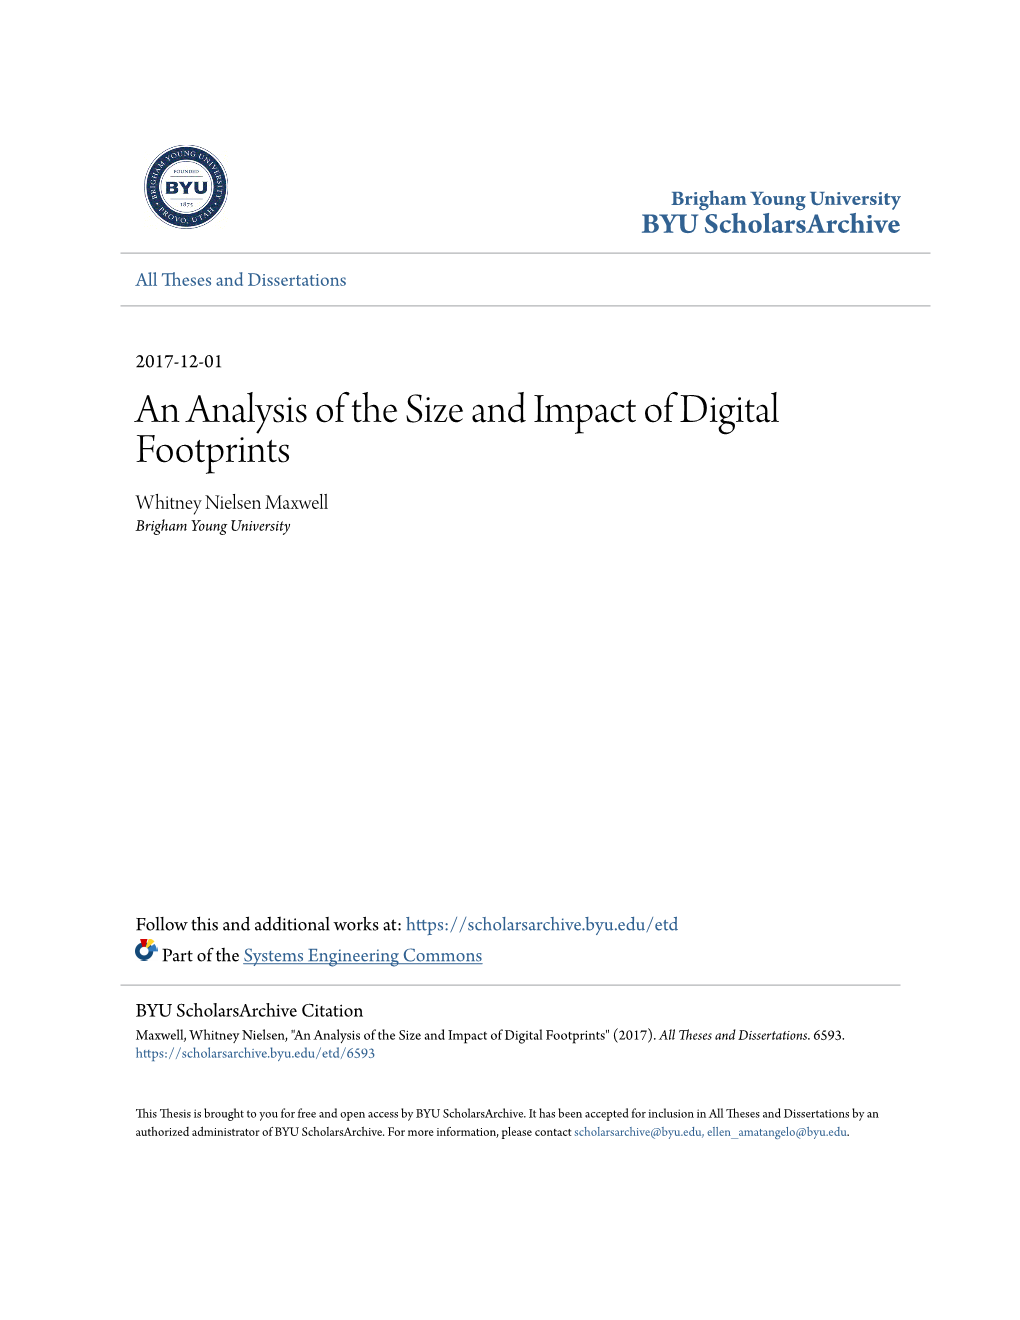 An Analysis of the Size and Impact of Digital Footprints Whitney Nielsen Maxwell Brigham Young University